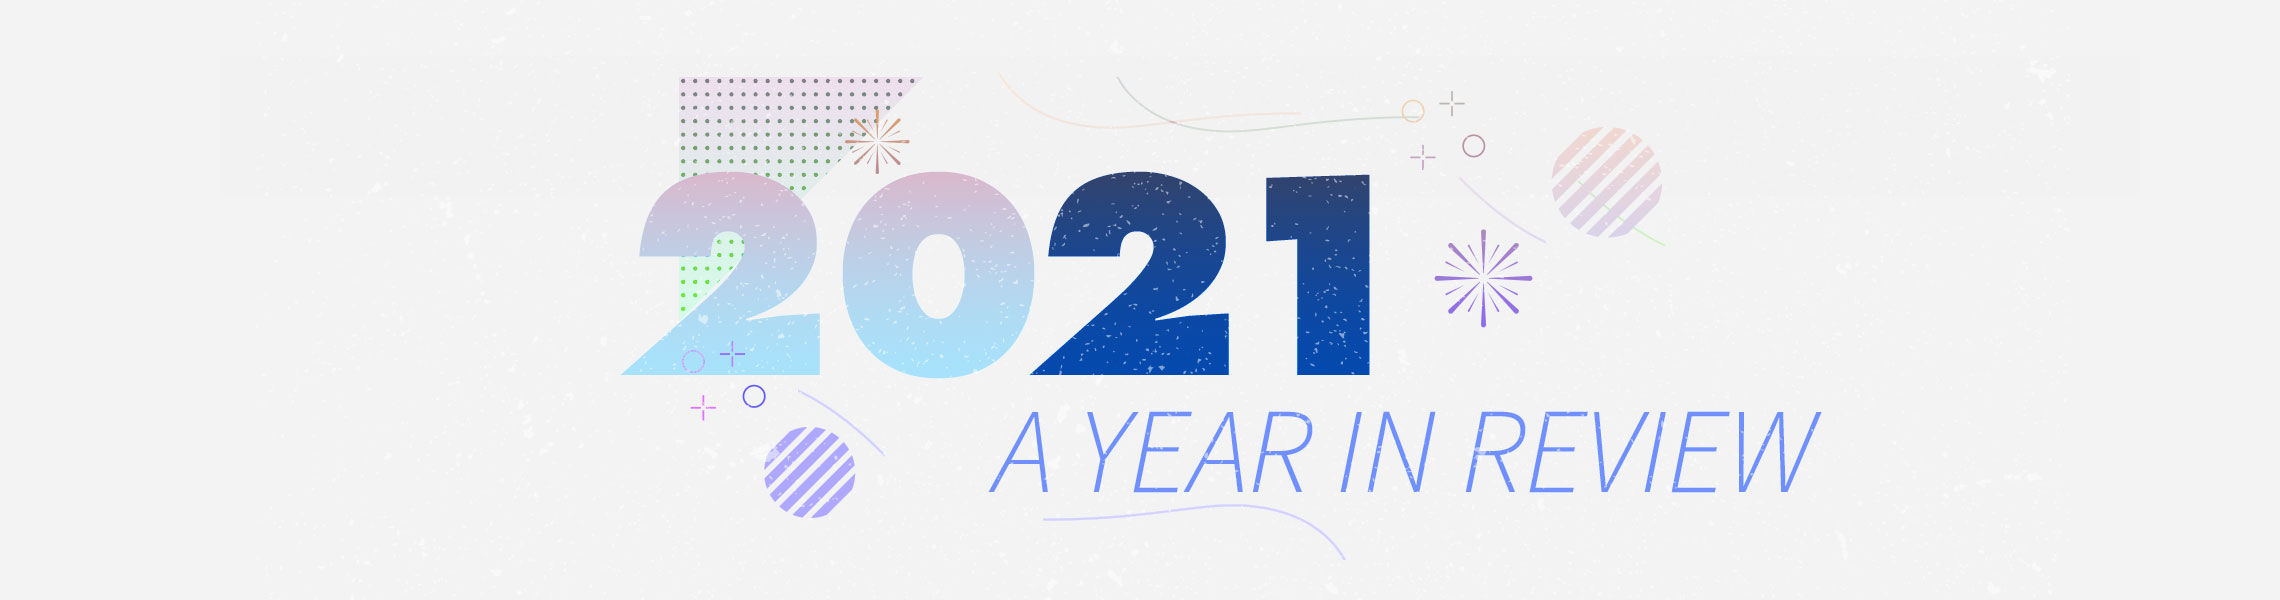 2021: A year in Review